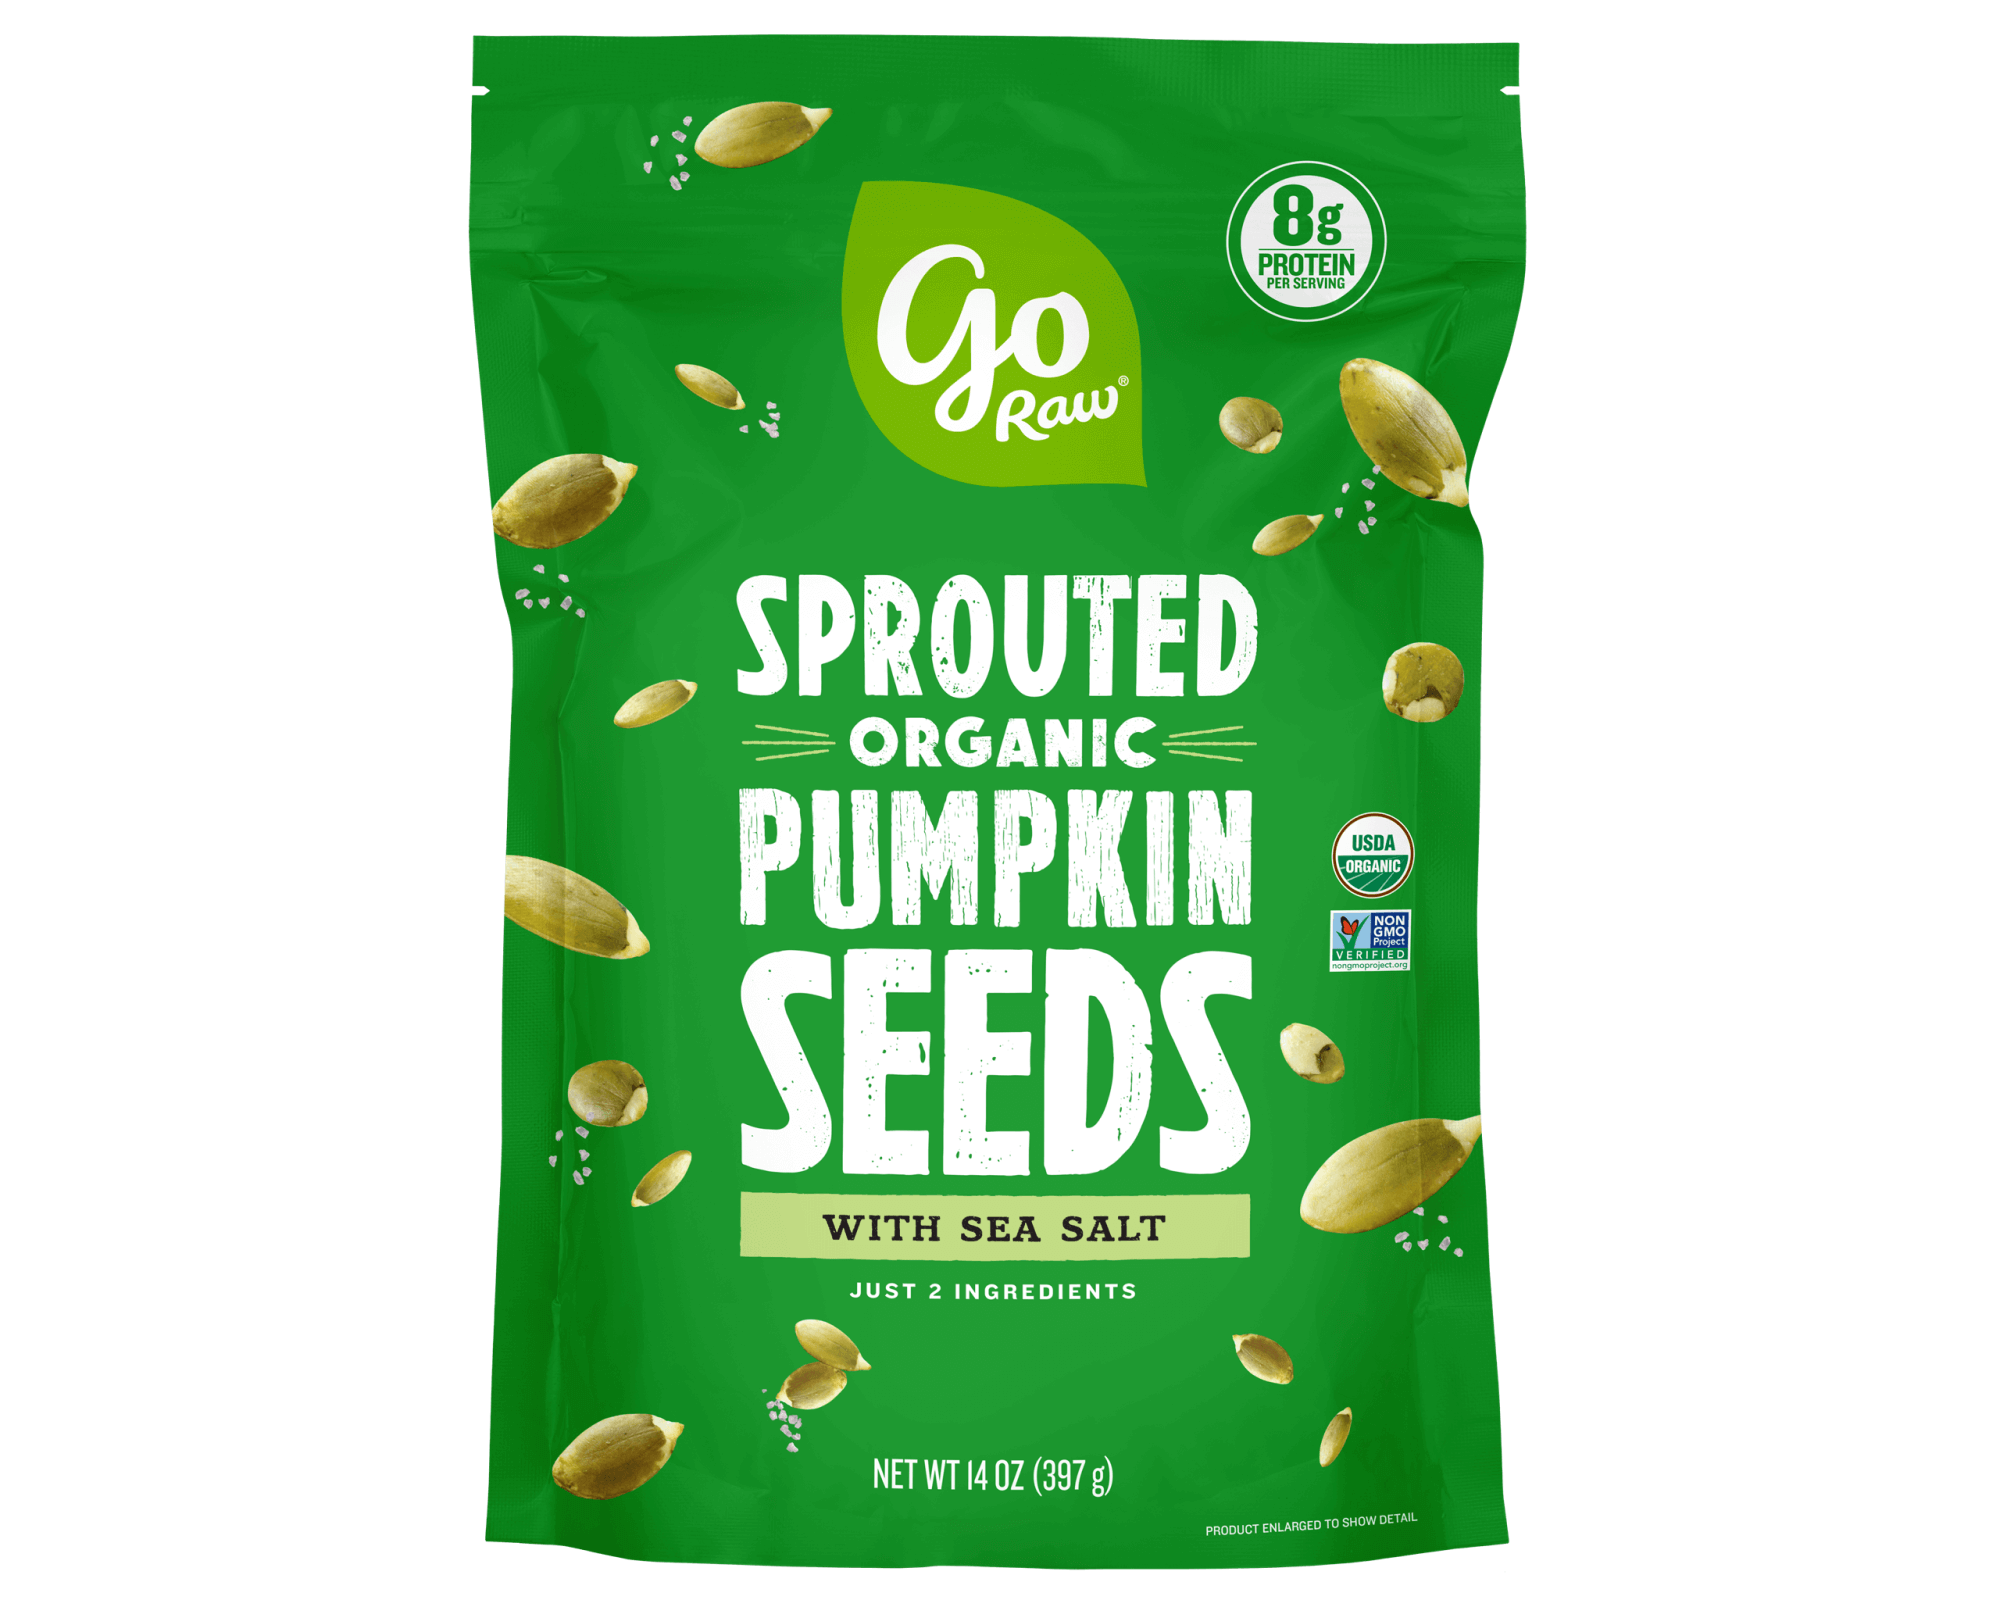 Go Raw Sprouted Pumpkin Seeds with 8g plant-based protein